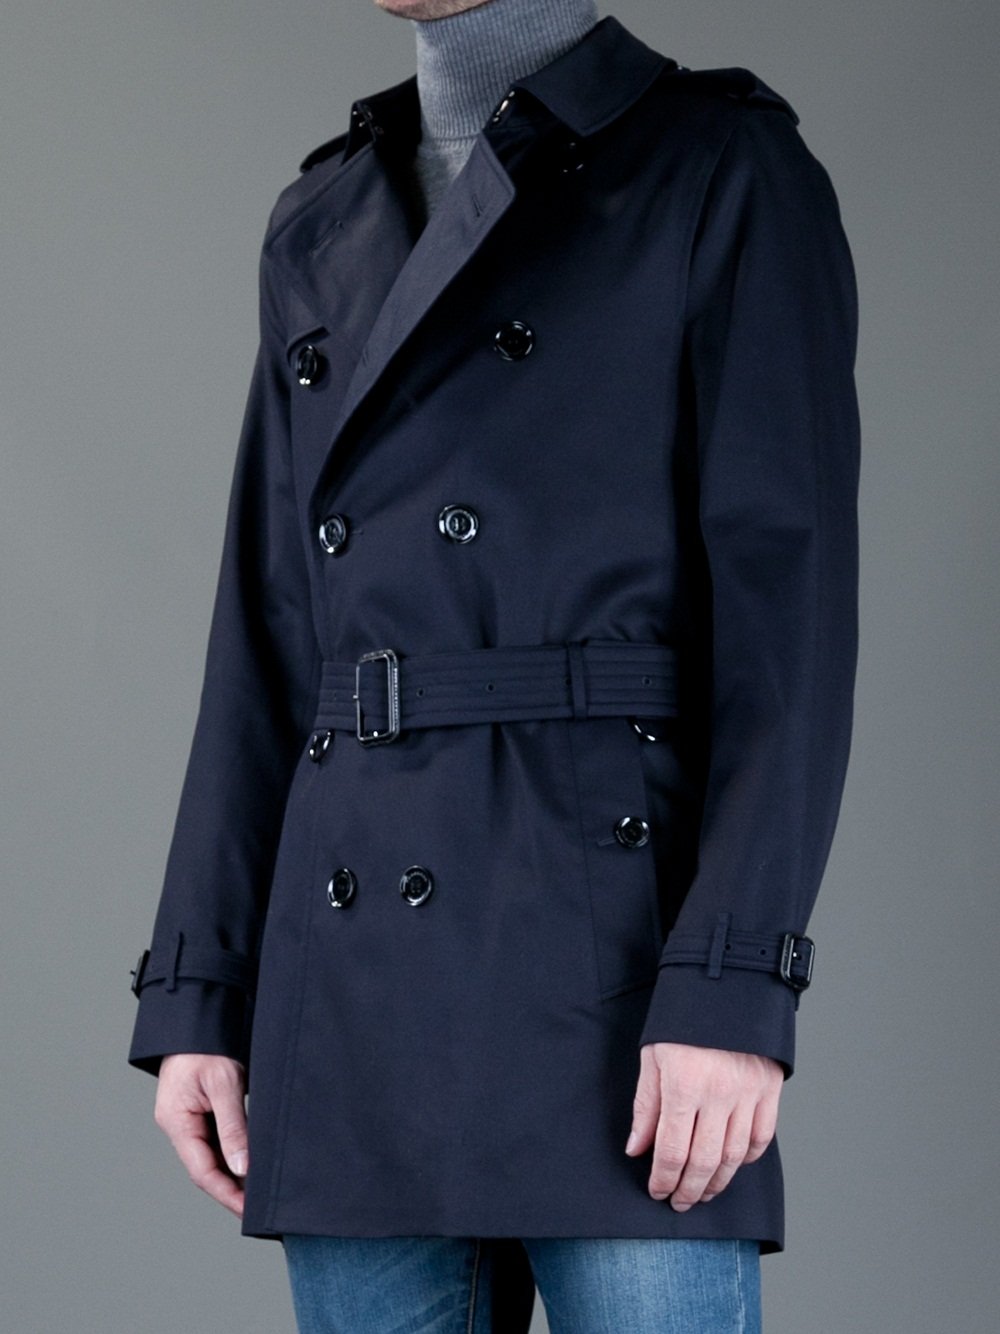 Burberry Britton Trenchcoat in Navy (Blue) for Men - Lyst